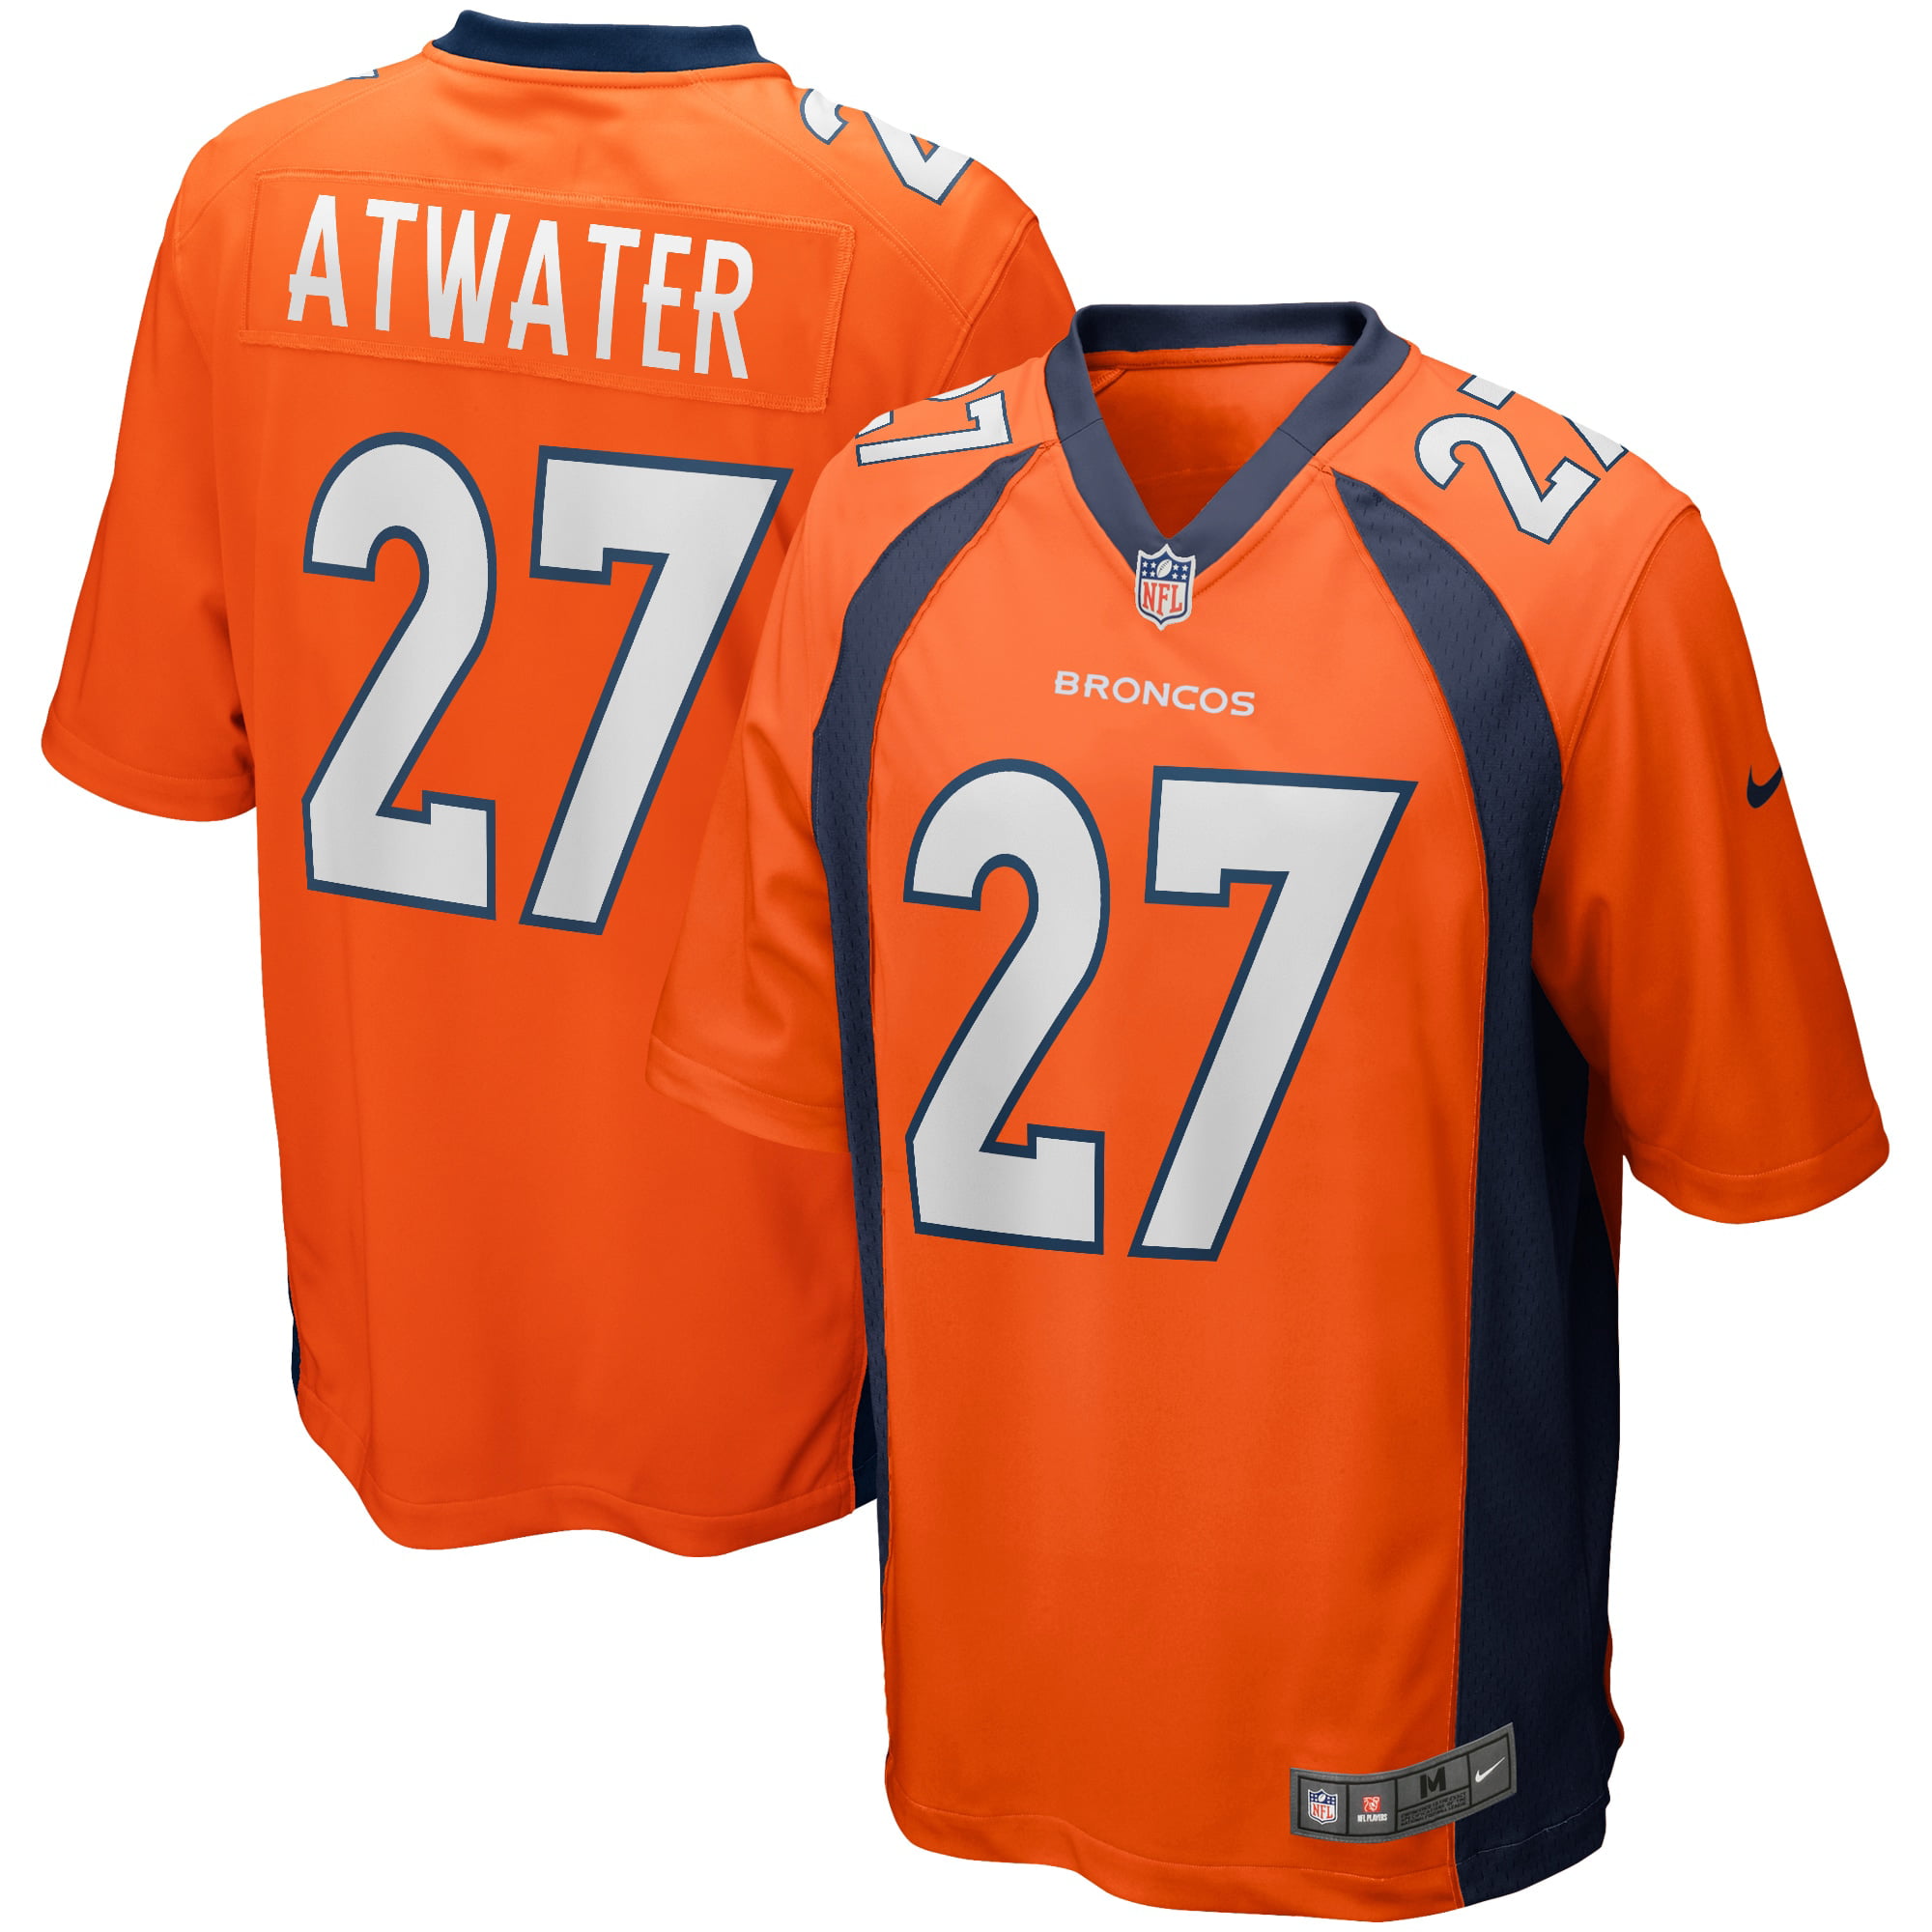 steve atwater white jersey